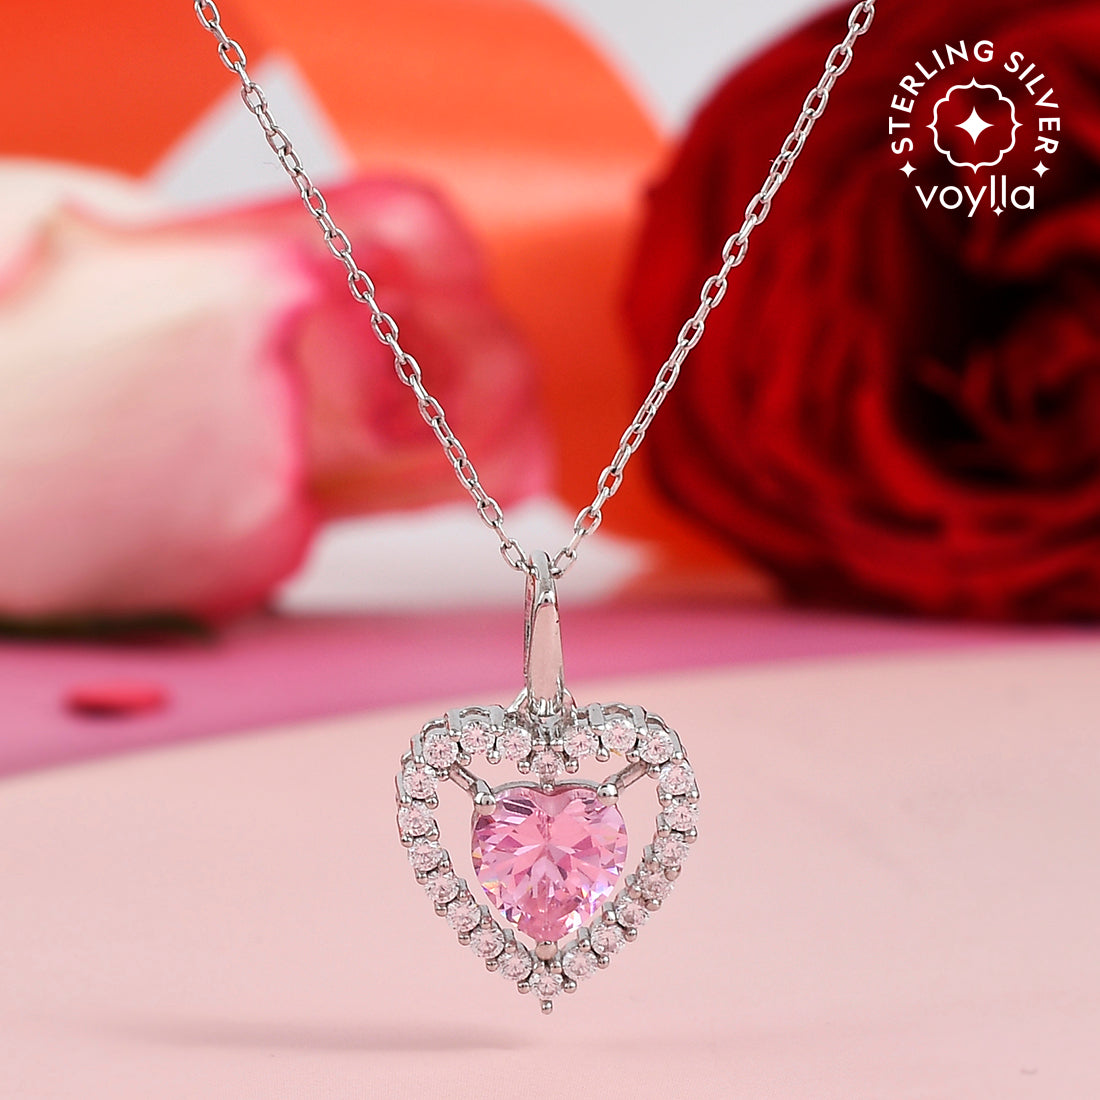 Women's Silver And Pink Cz Heart Pendant - Voylla